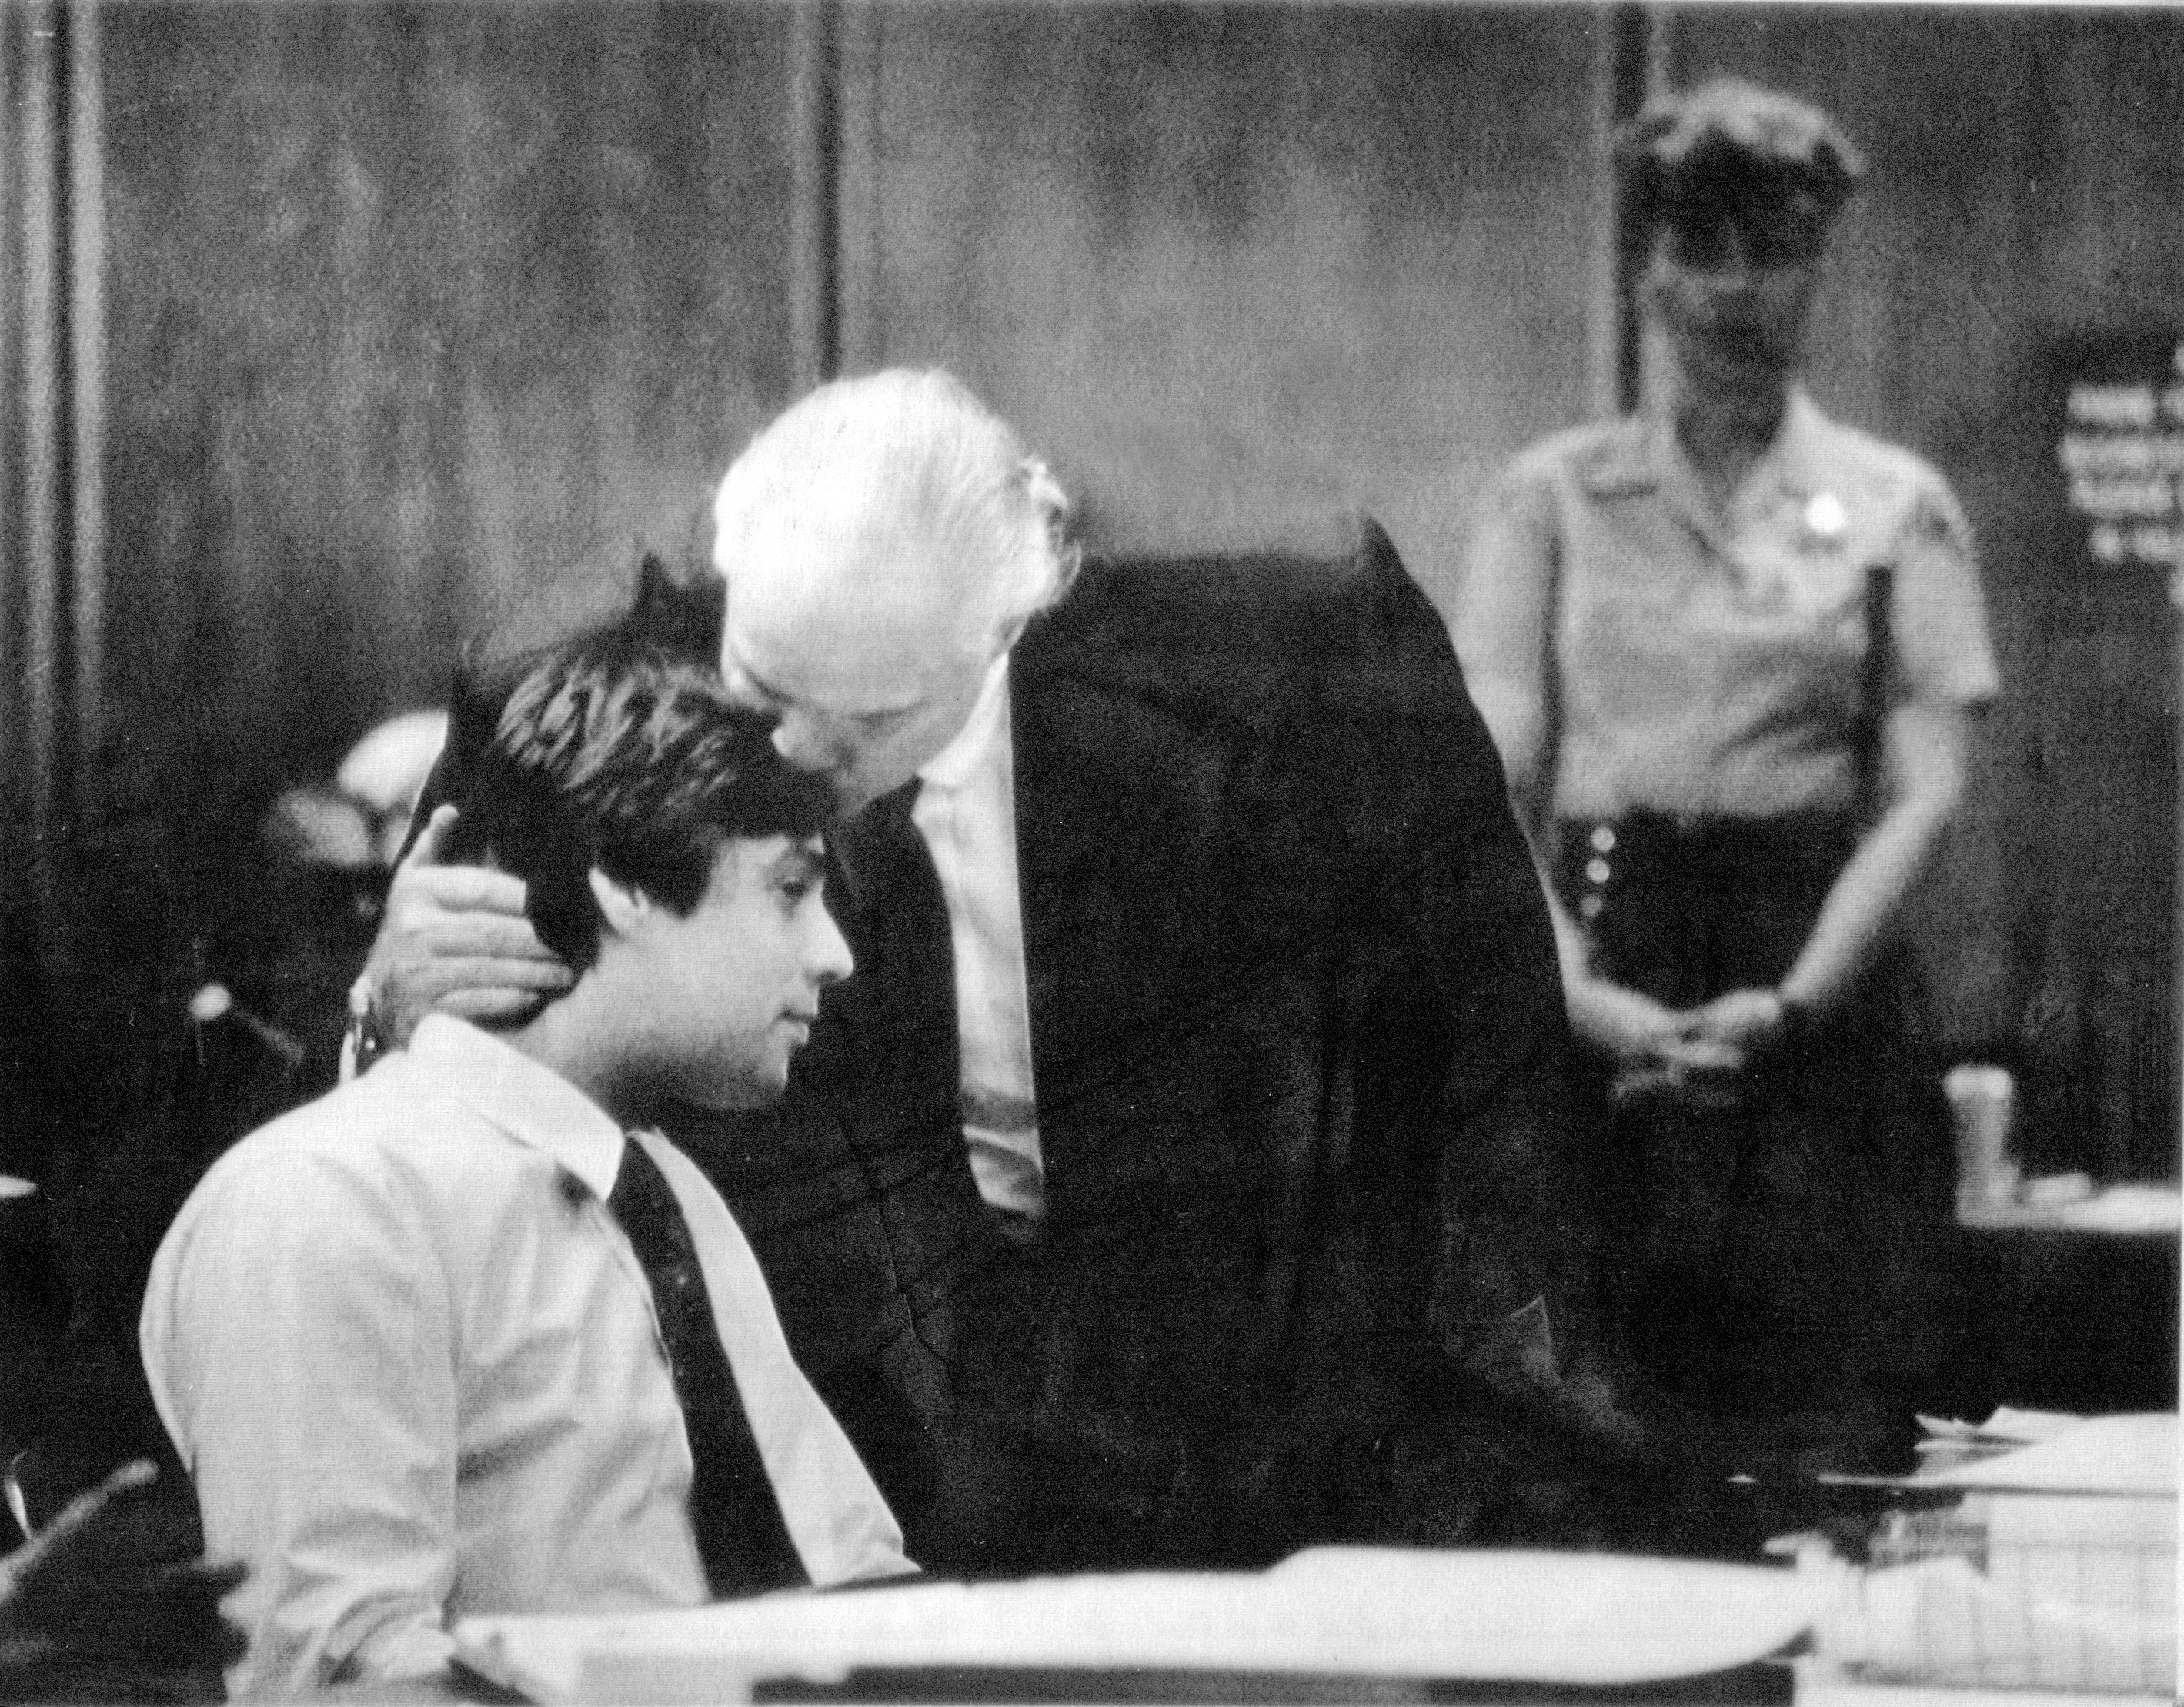 Marlon Brando gives son Christian a kiss in the courtroom during his trial in 1990 | Source: Getty Images